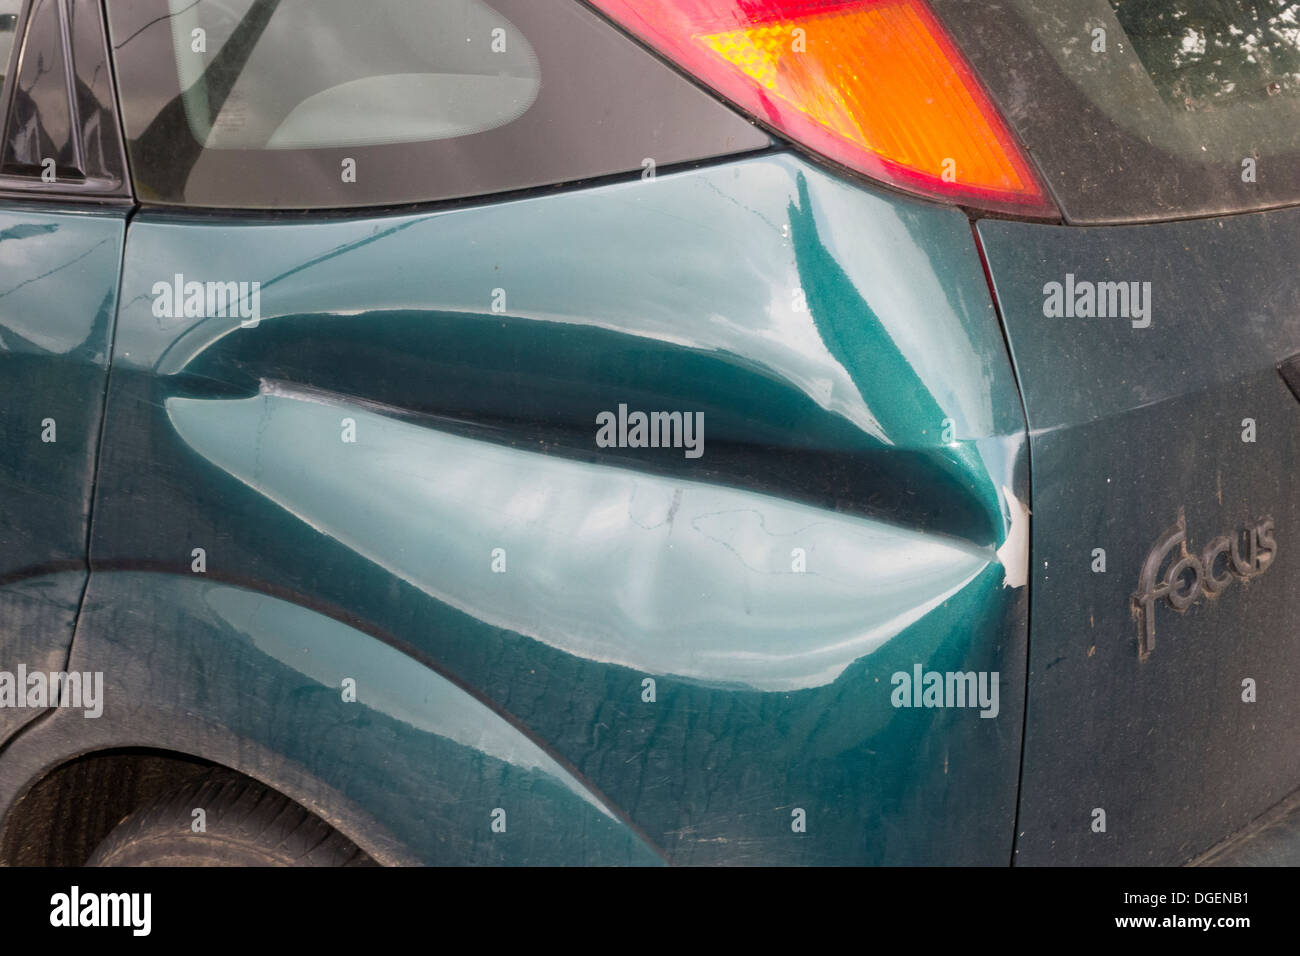 Panel Damage: a bad dent in a body panel on a Ford Focus car. Stock Photo